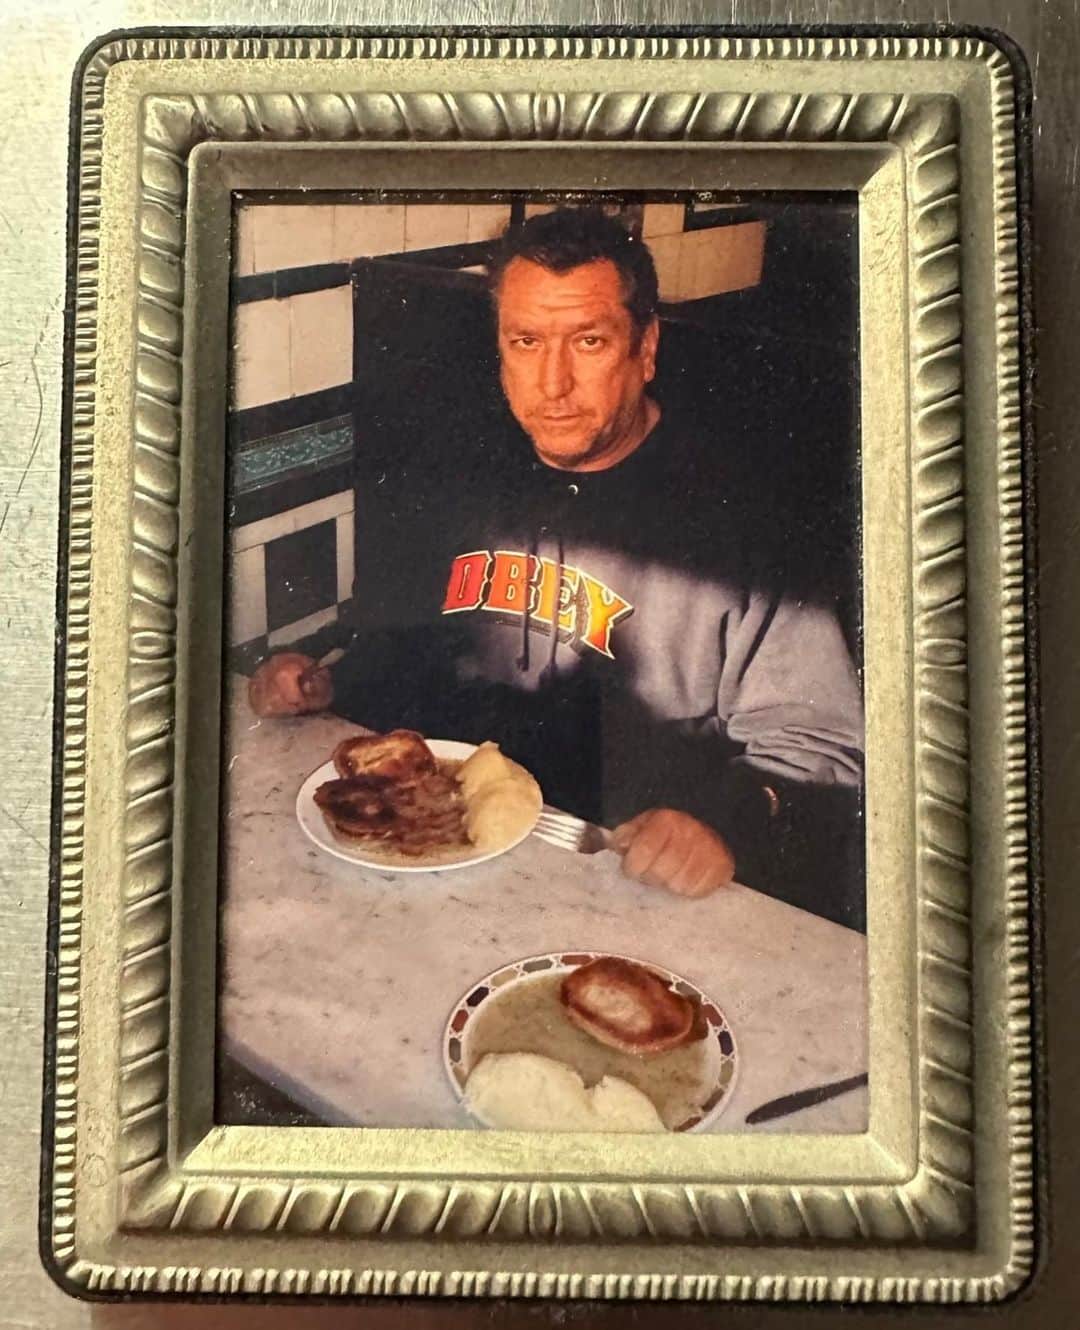 Shepard Faireyのインスタグラム：「Here's a picture featuring my friend, @jonesysjukebox, savoring a plate of "pie and mash" somewhere in London, as he told me. Today is his birthday, and I want to extend my warmest wishes to him! The compelling blend of energy, rebellion, and creativity embodied by The Sex Pistols transformed my life in ways I'll forever cherish. My camaraderie with Steve Jones, the talented guitarist of the Pistols, spans two decades. Here's to Jonesy – cheers, mate!⁠ –Shepard」